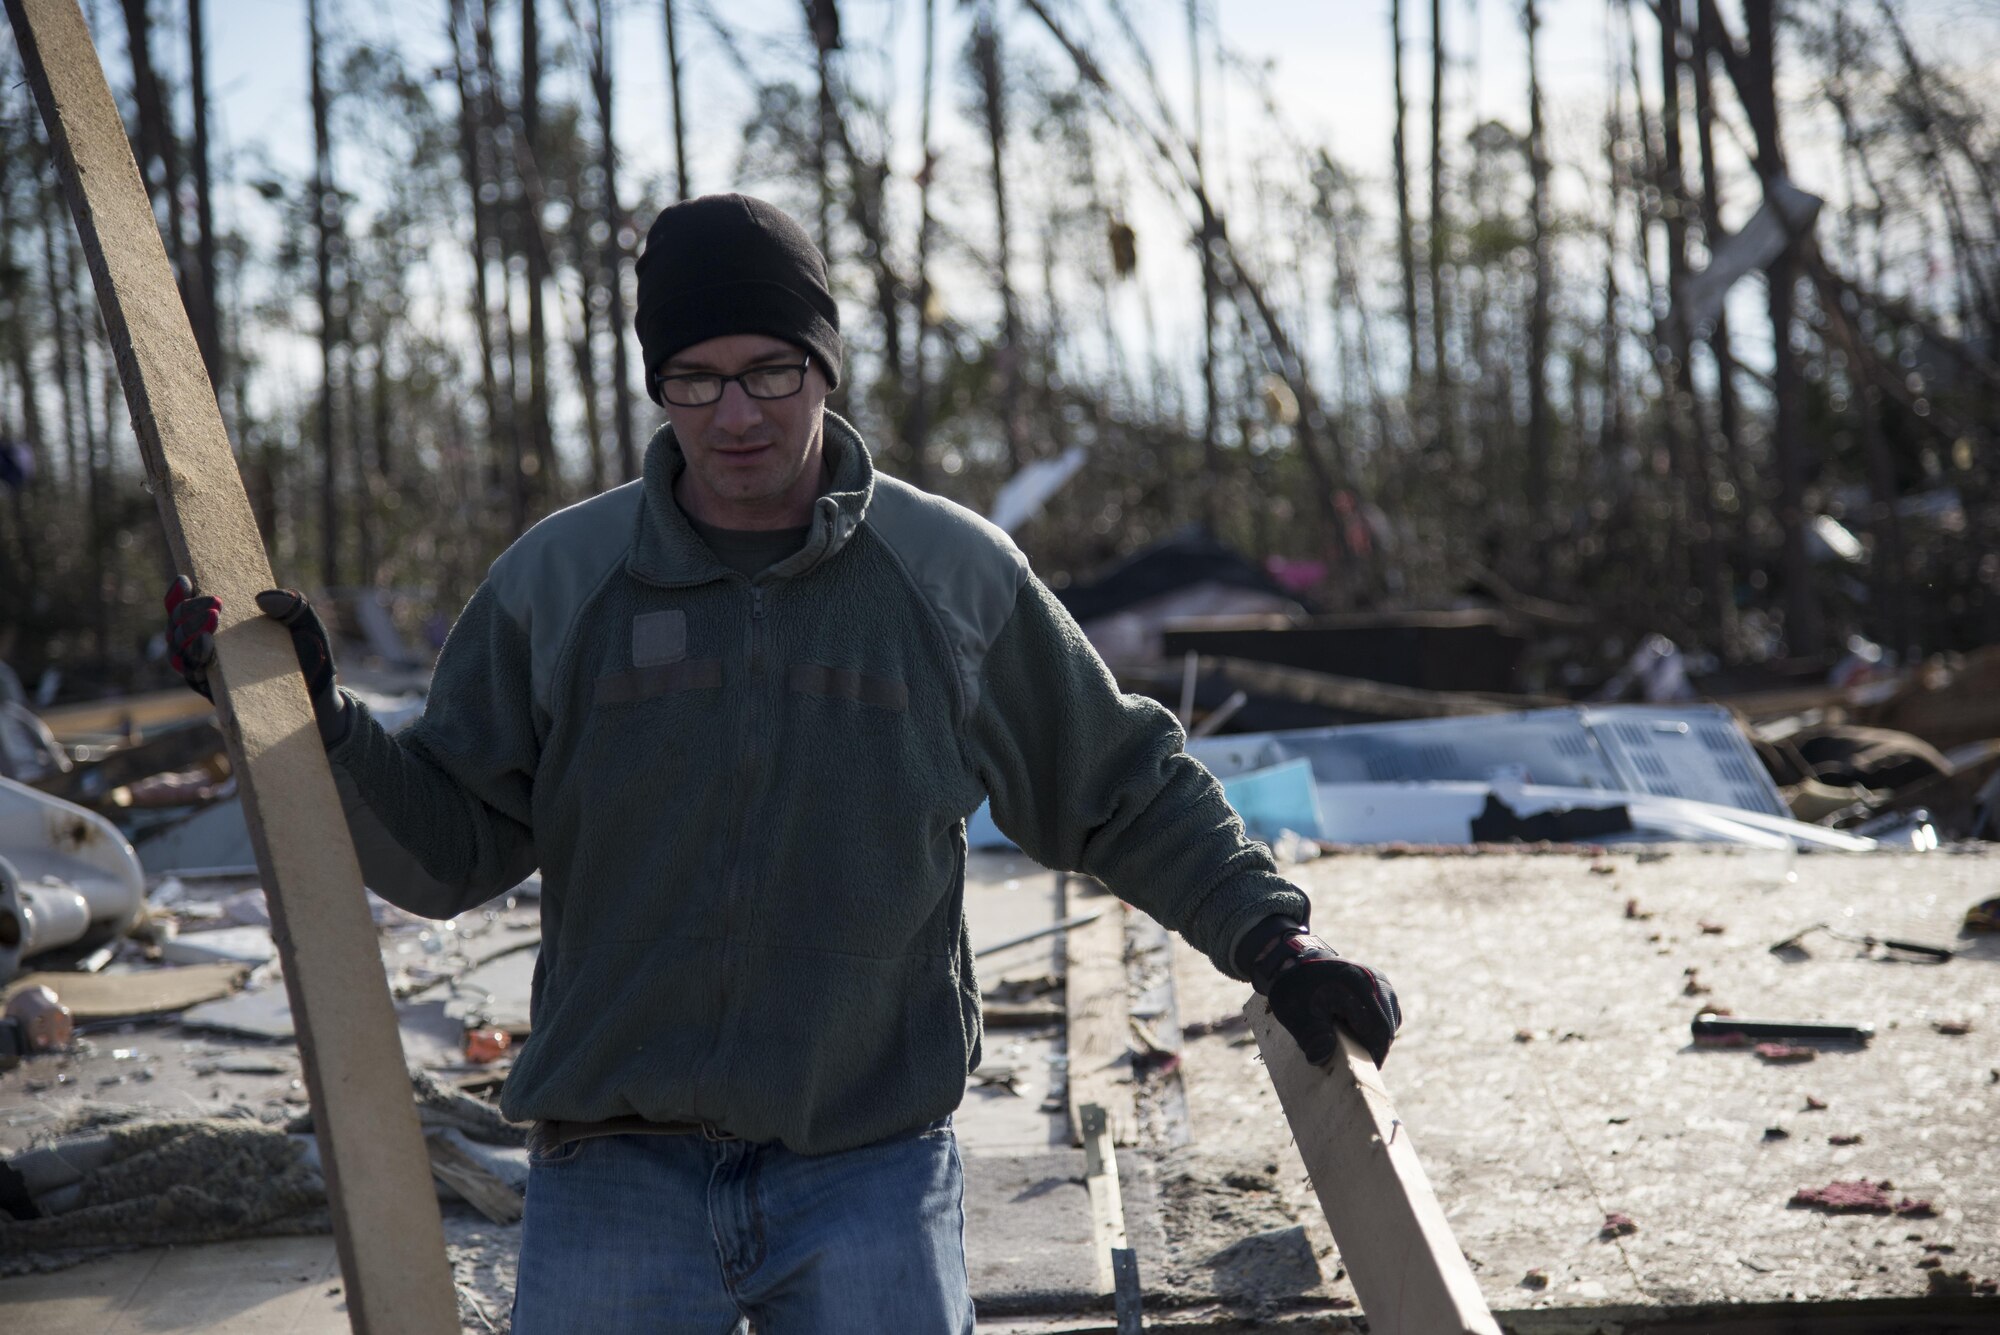 A Moody Air Force Base Airman carries salvageable wood away from piles of debris left in the wake of a tornado, Jan. 28, 2017, in Adel, Ga. The tornado killed 15 people and was later deemed an EF3, the strongest tornado to touch down in the county’s history. (U.S. Air Force photo by 2d Lt. Kaitlin Toner)